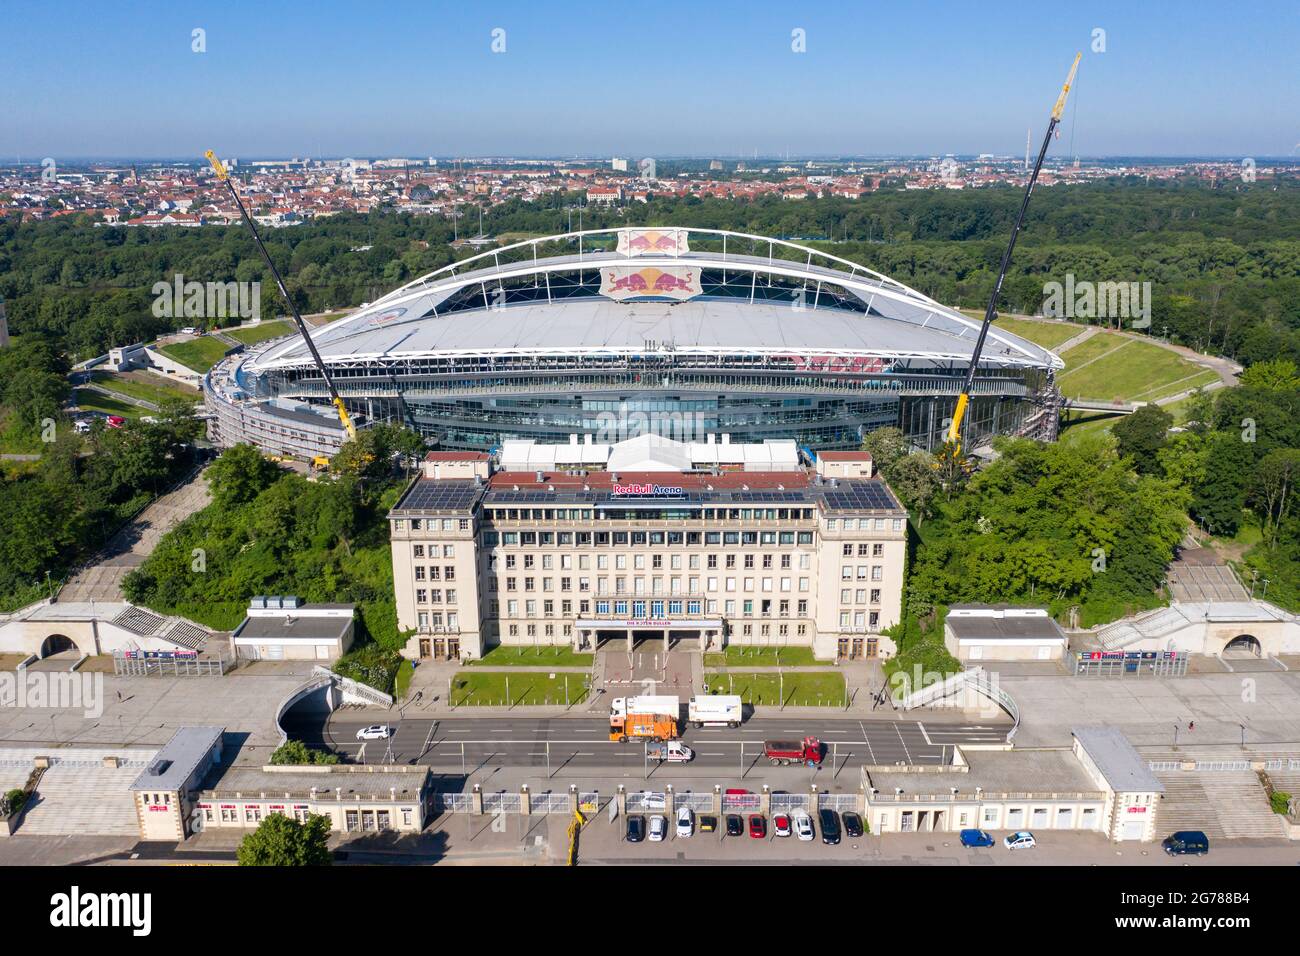 14 June 21 Saxony Leipzig Two Cranes Stand At The Red Bull Arena Rb Leipzig S Home Ground Is Being Rebuilt The Spectator Capacity Increases From 42 558 To 47 069 Standing And Seated The